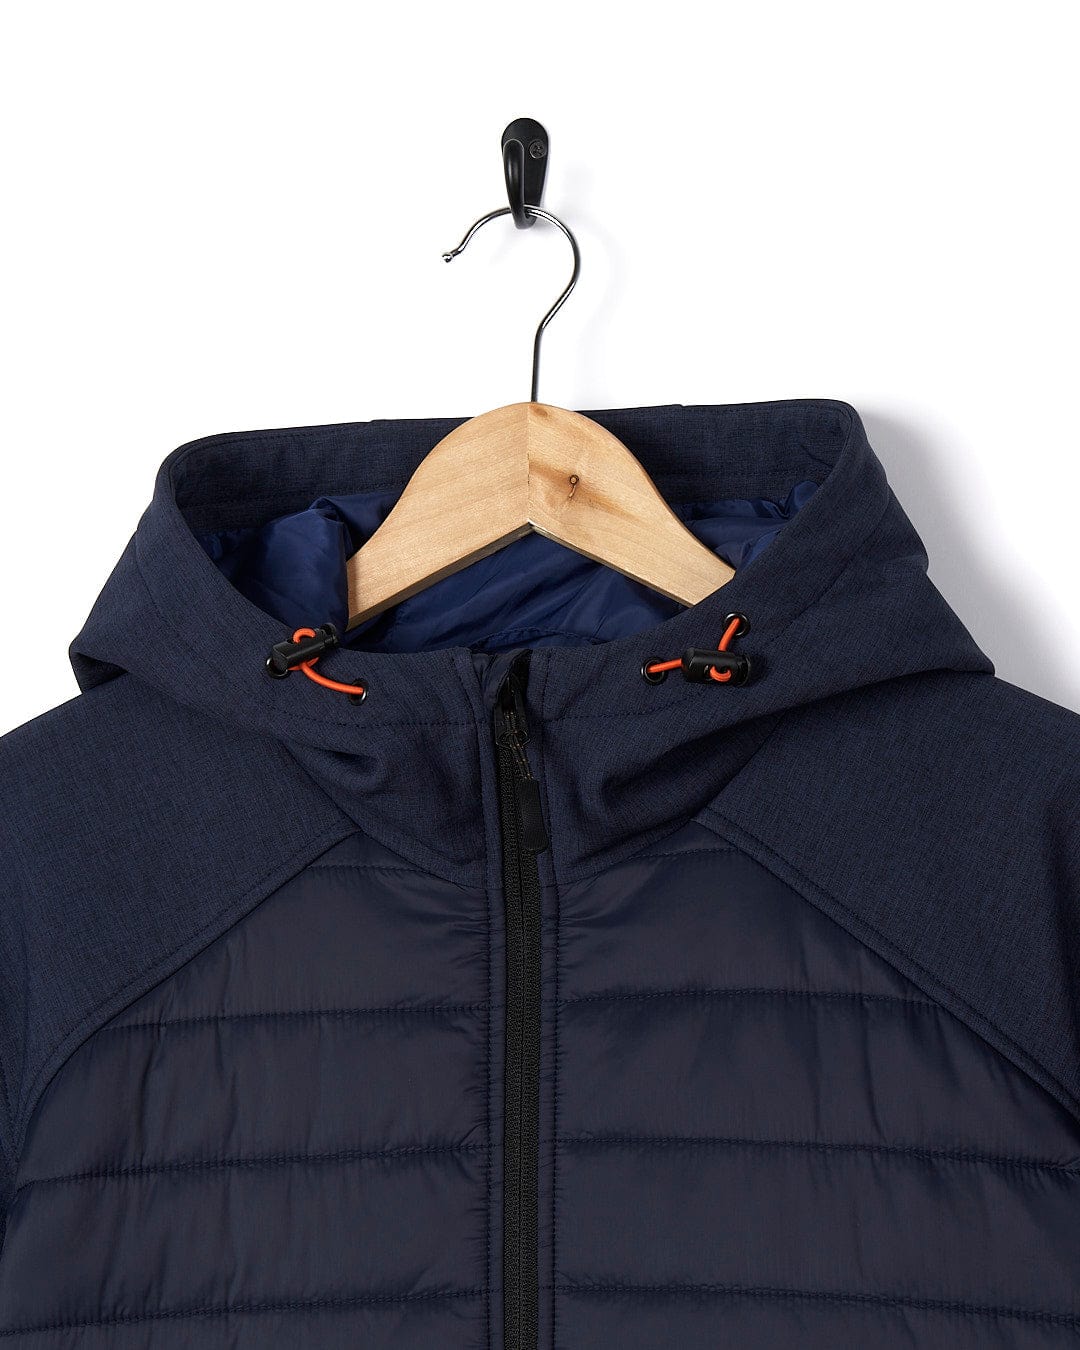 A Saltrock Purbeck Padded Jacket hanging on a hanger.